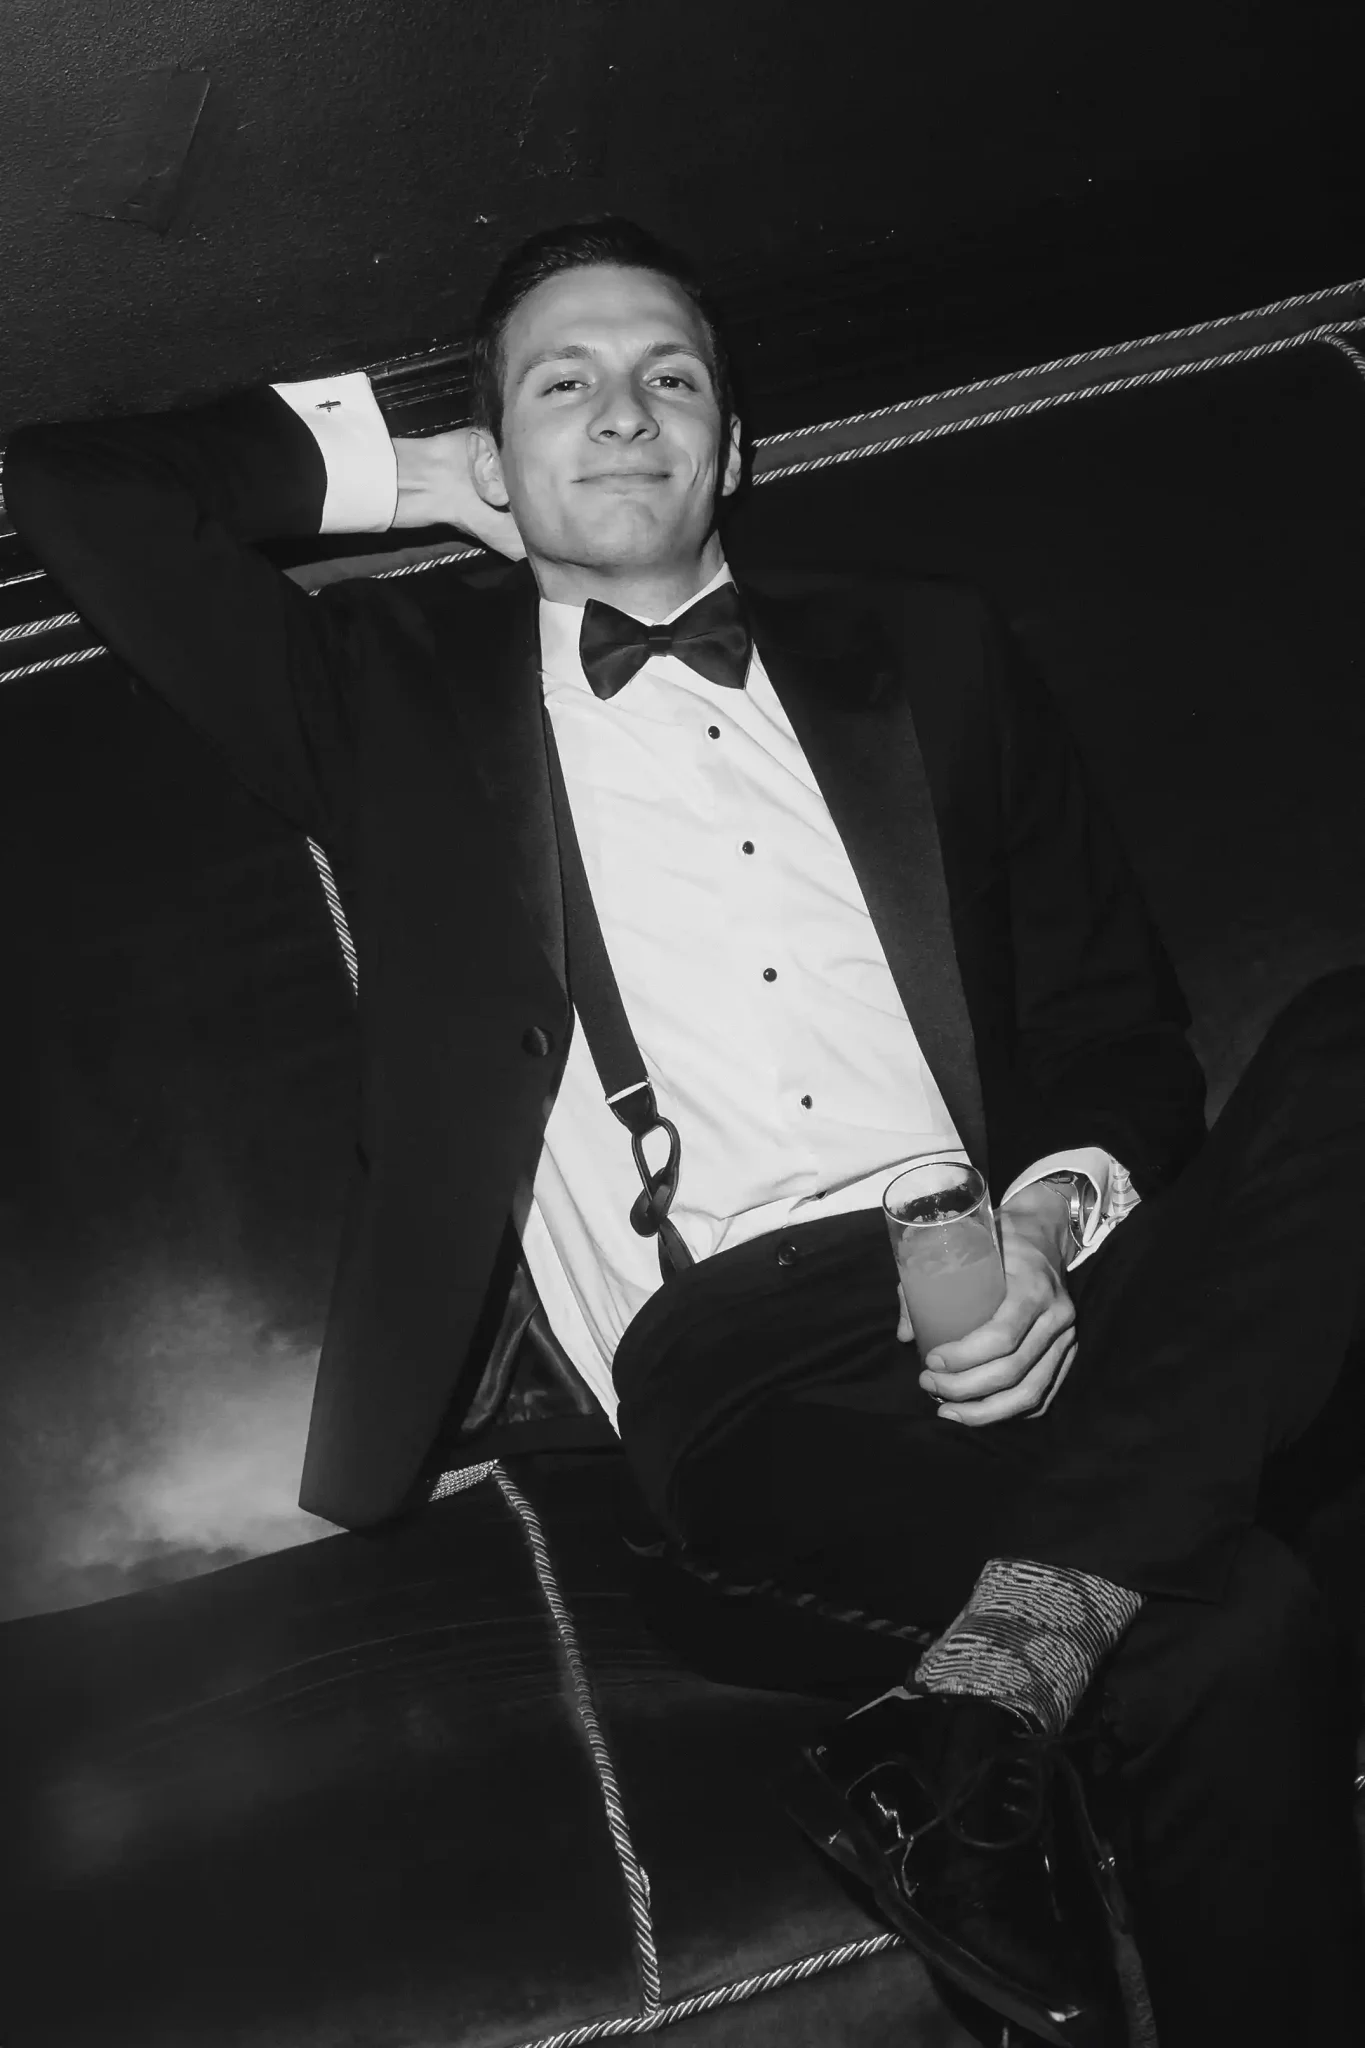 A man in a tuxedo sitting on a couch.